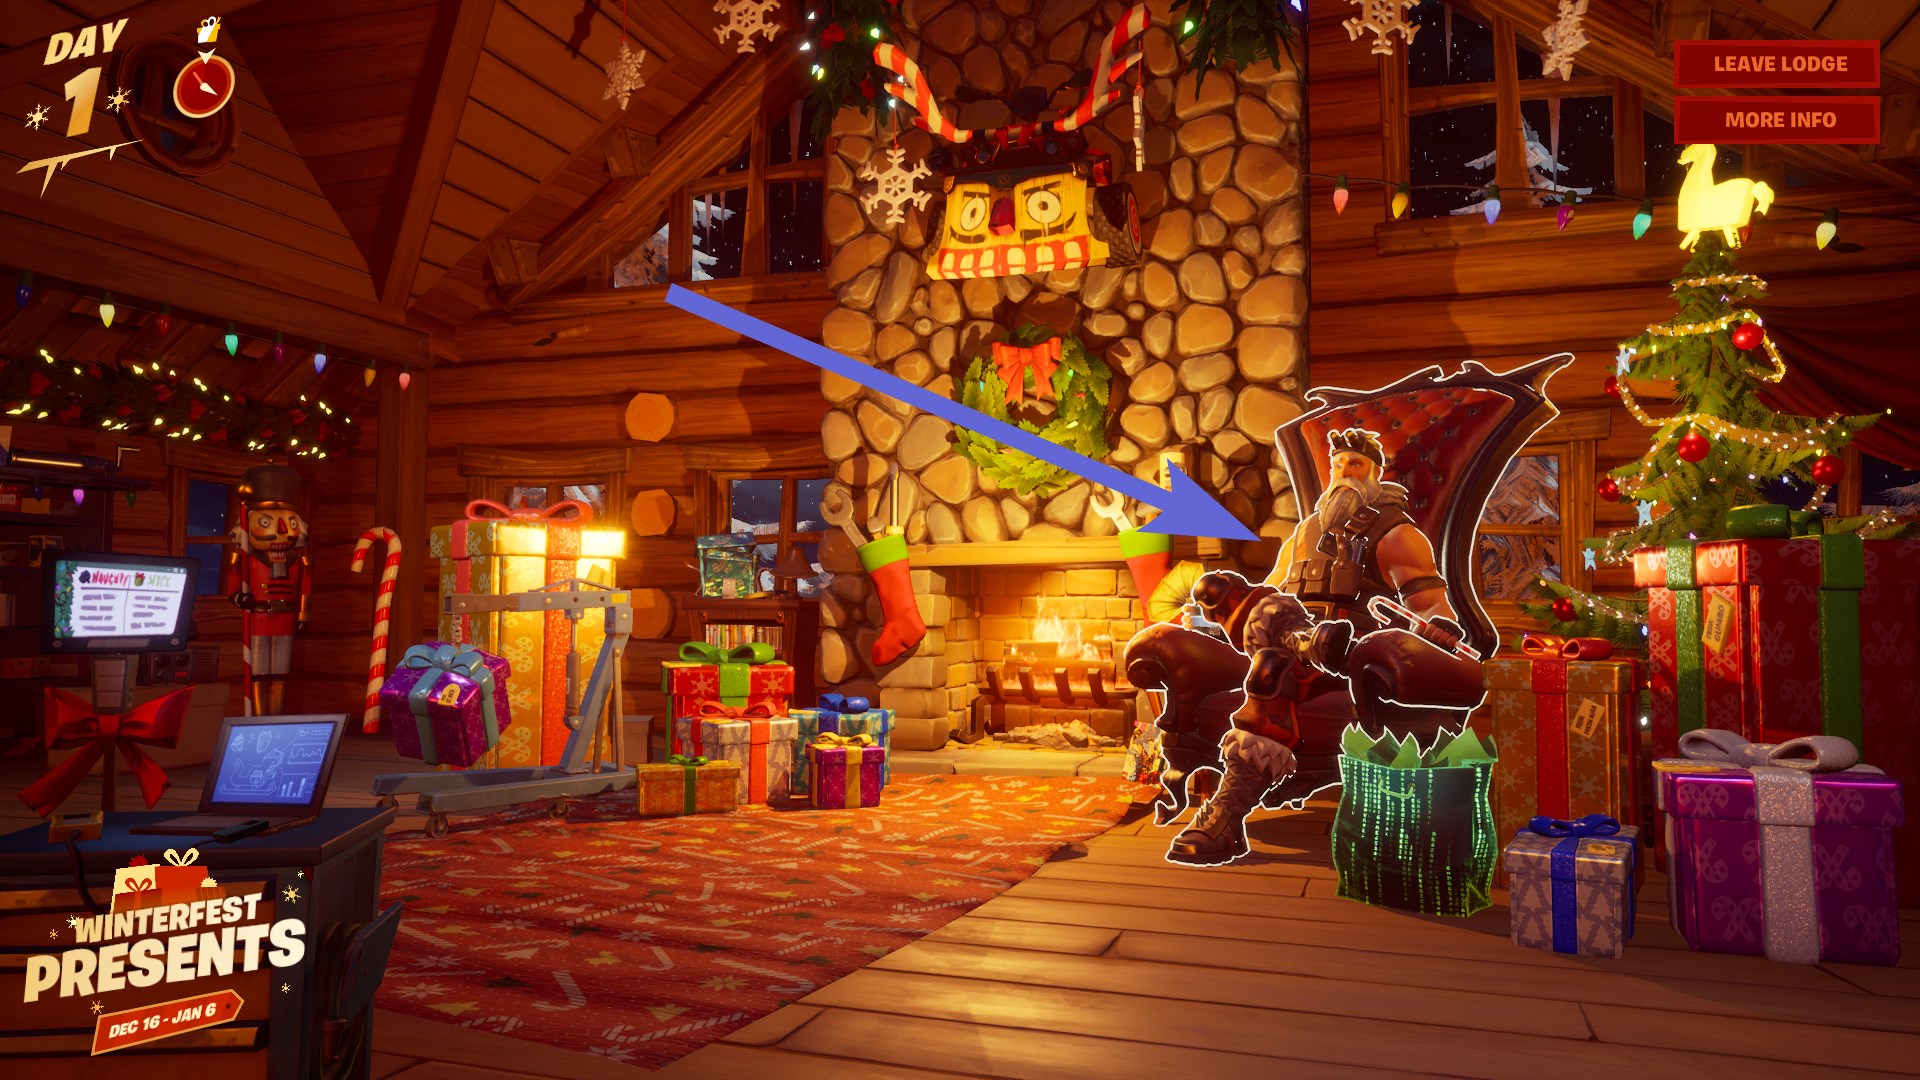 Warm yourself at the Yule Log in Cozy Lodge - Winterfest 2021 challenge 